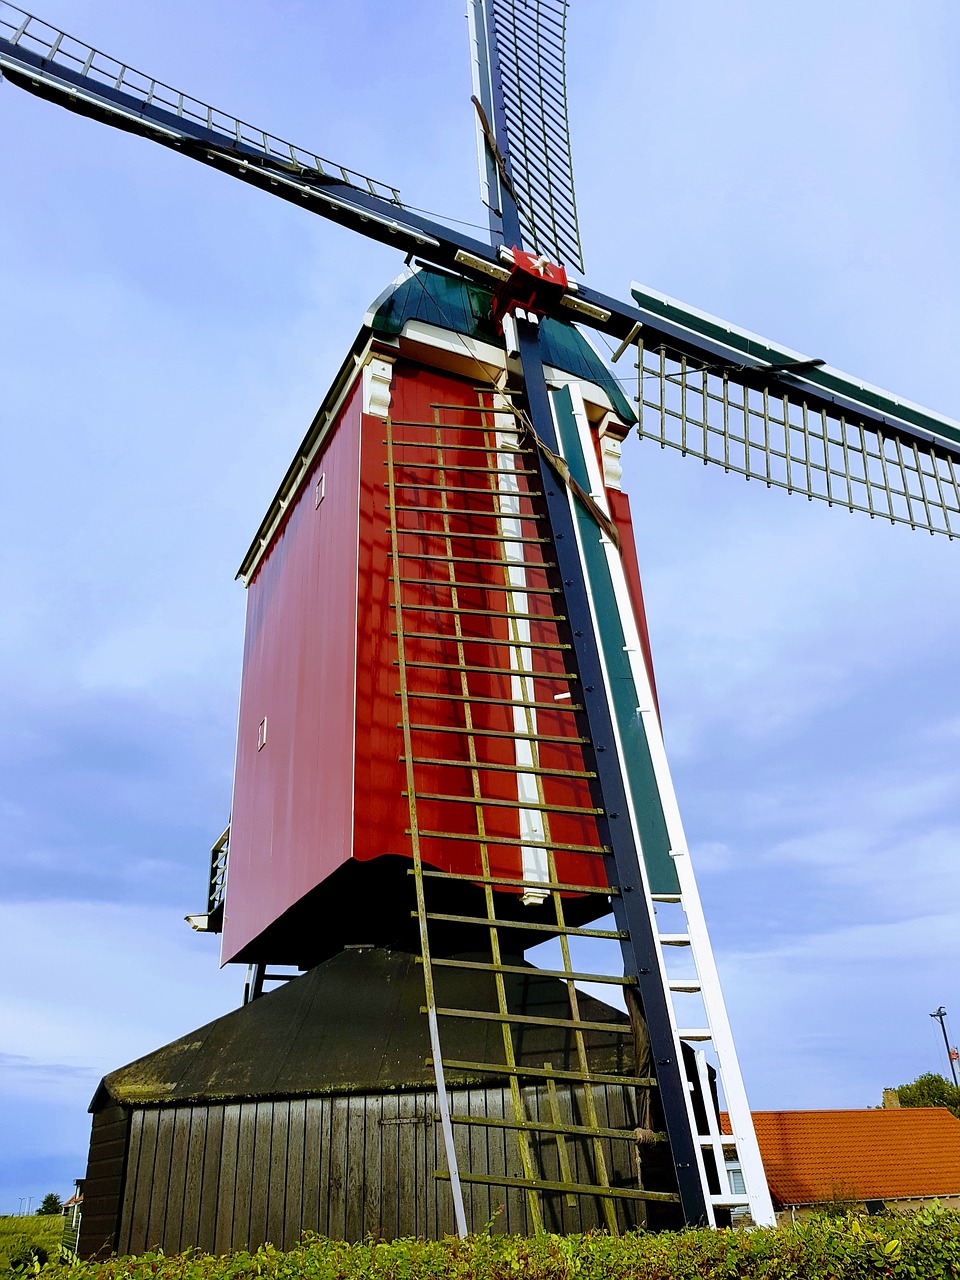 windmill holland old free photo